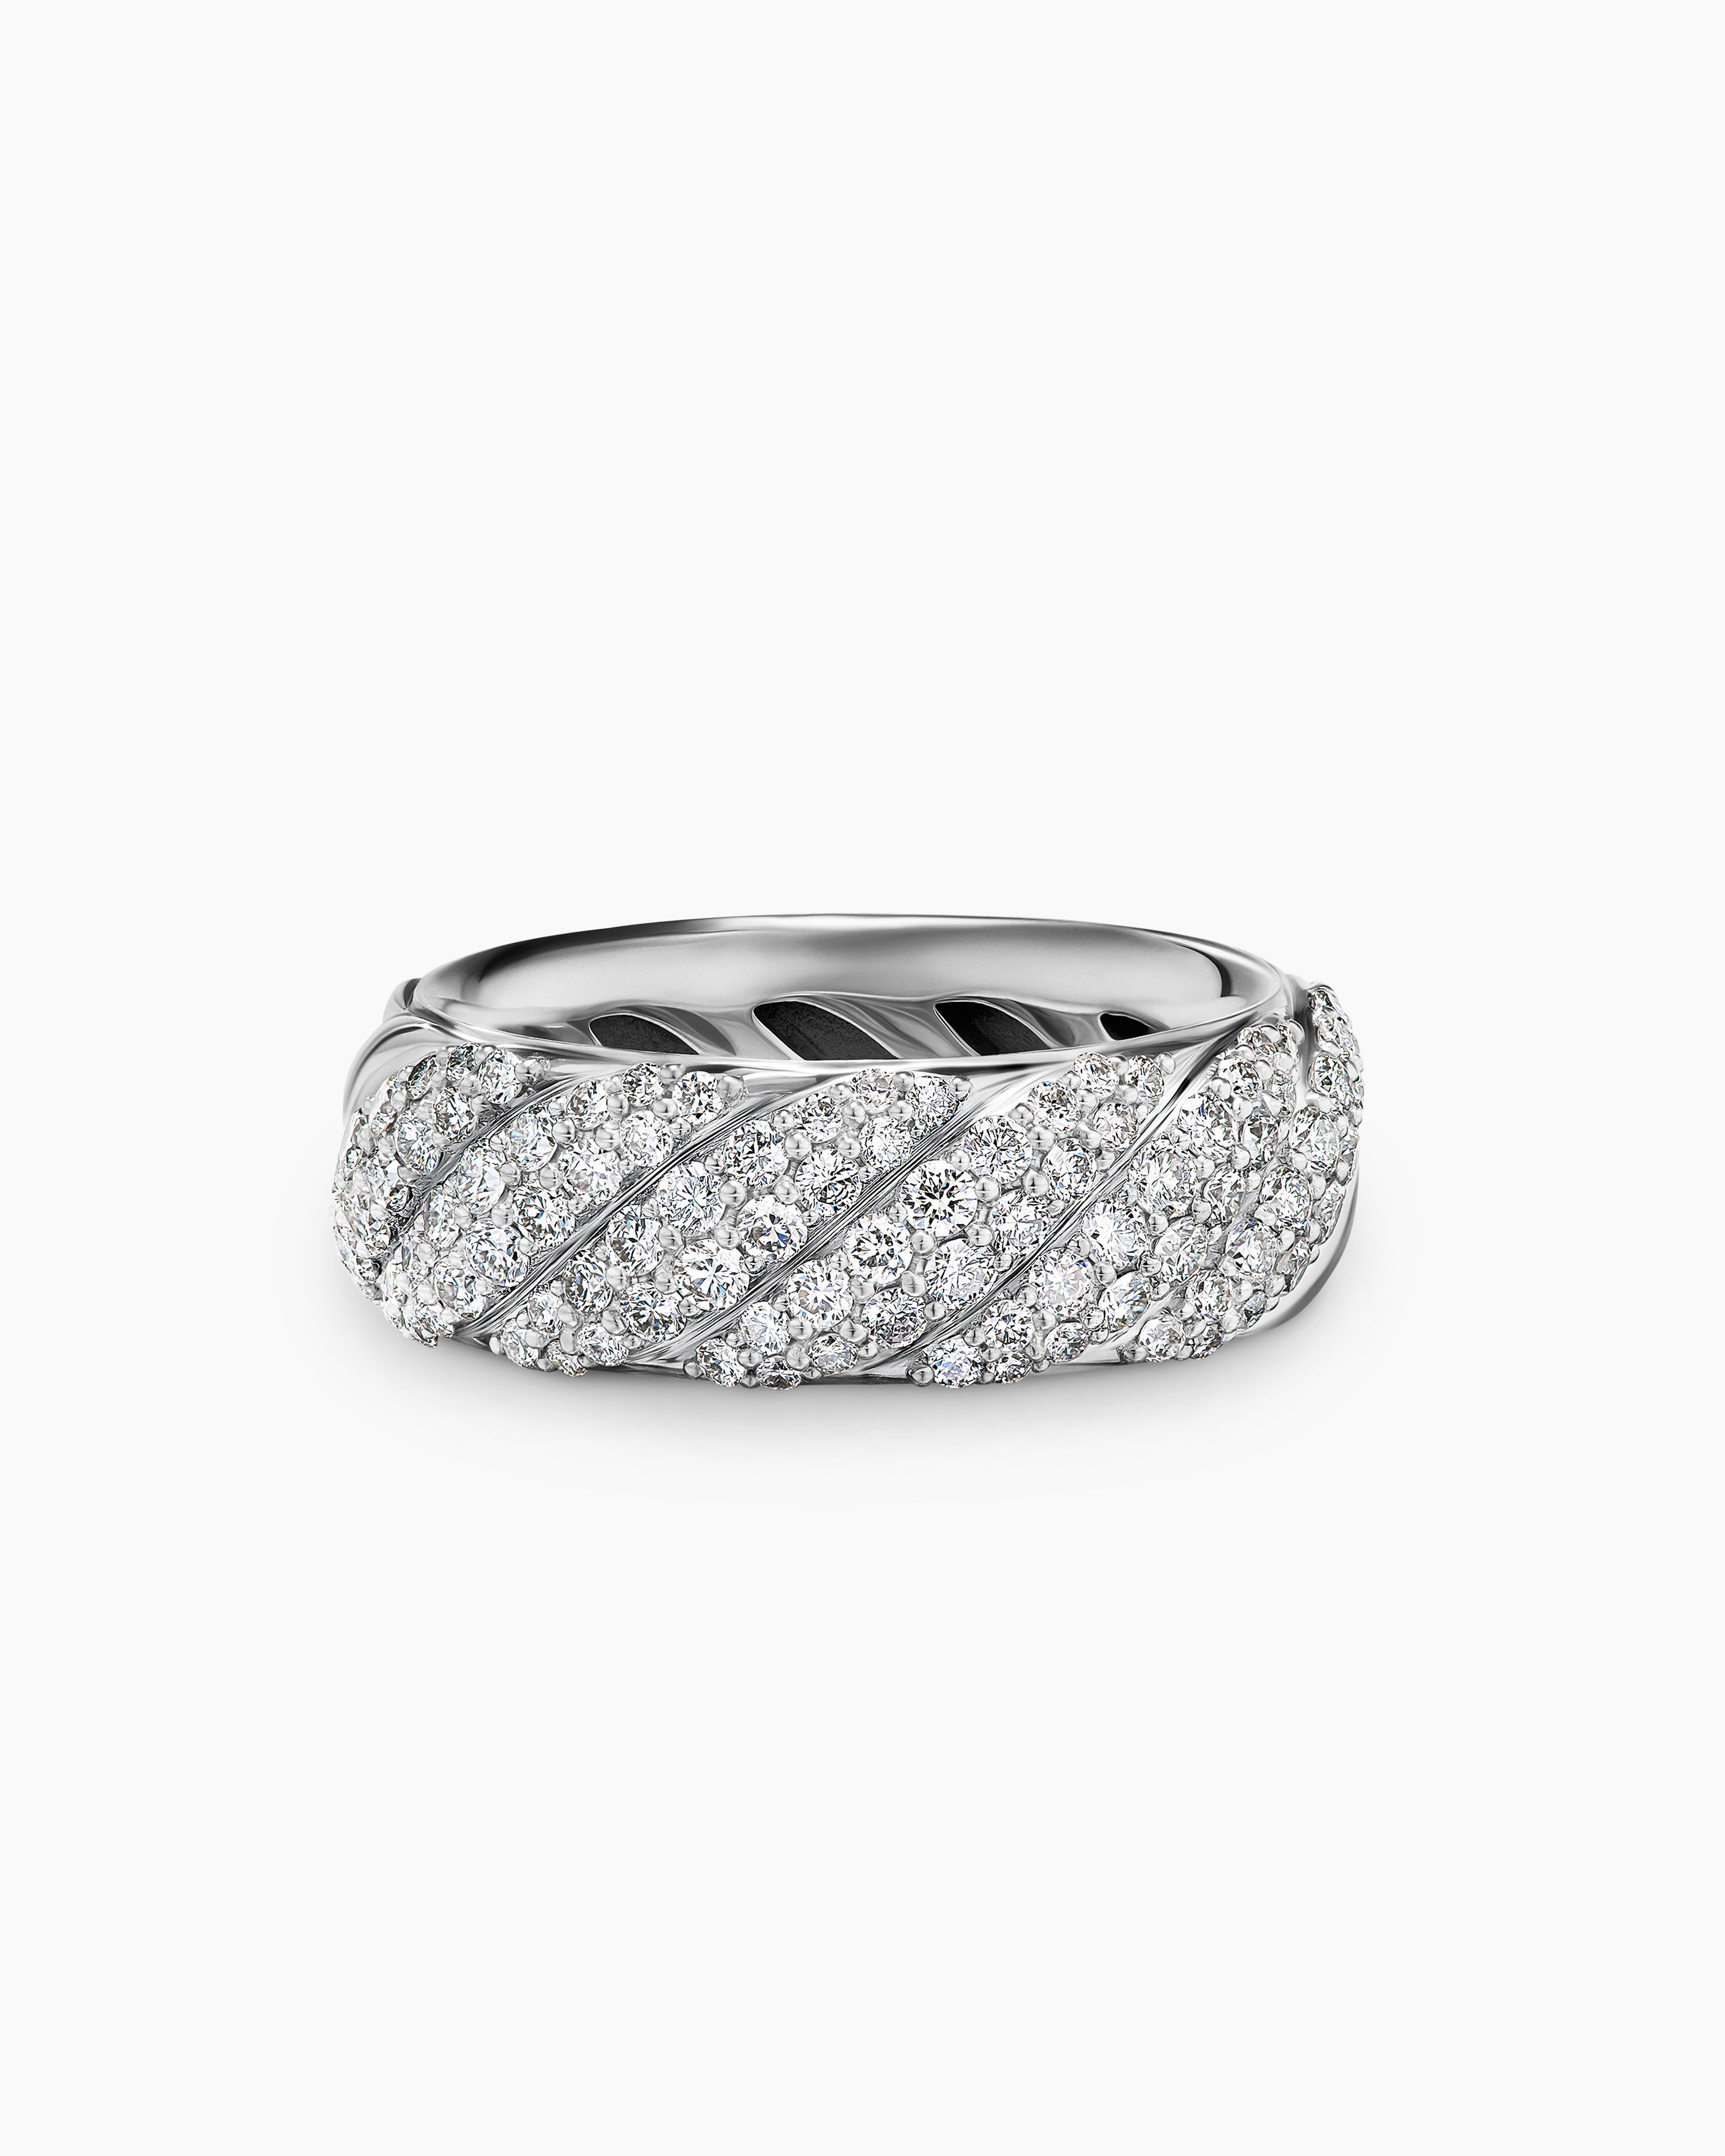 Cable Loop Band Ring in Sterling Silver with Diamonds, 7mm | David